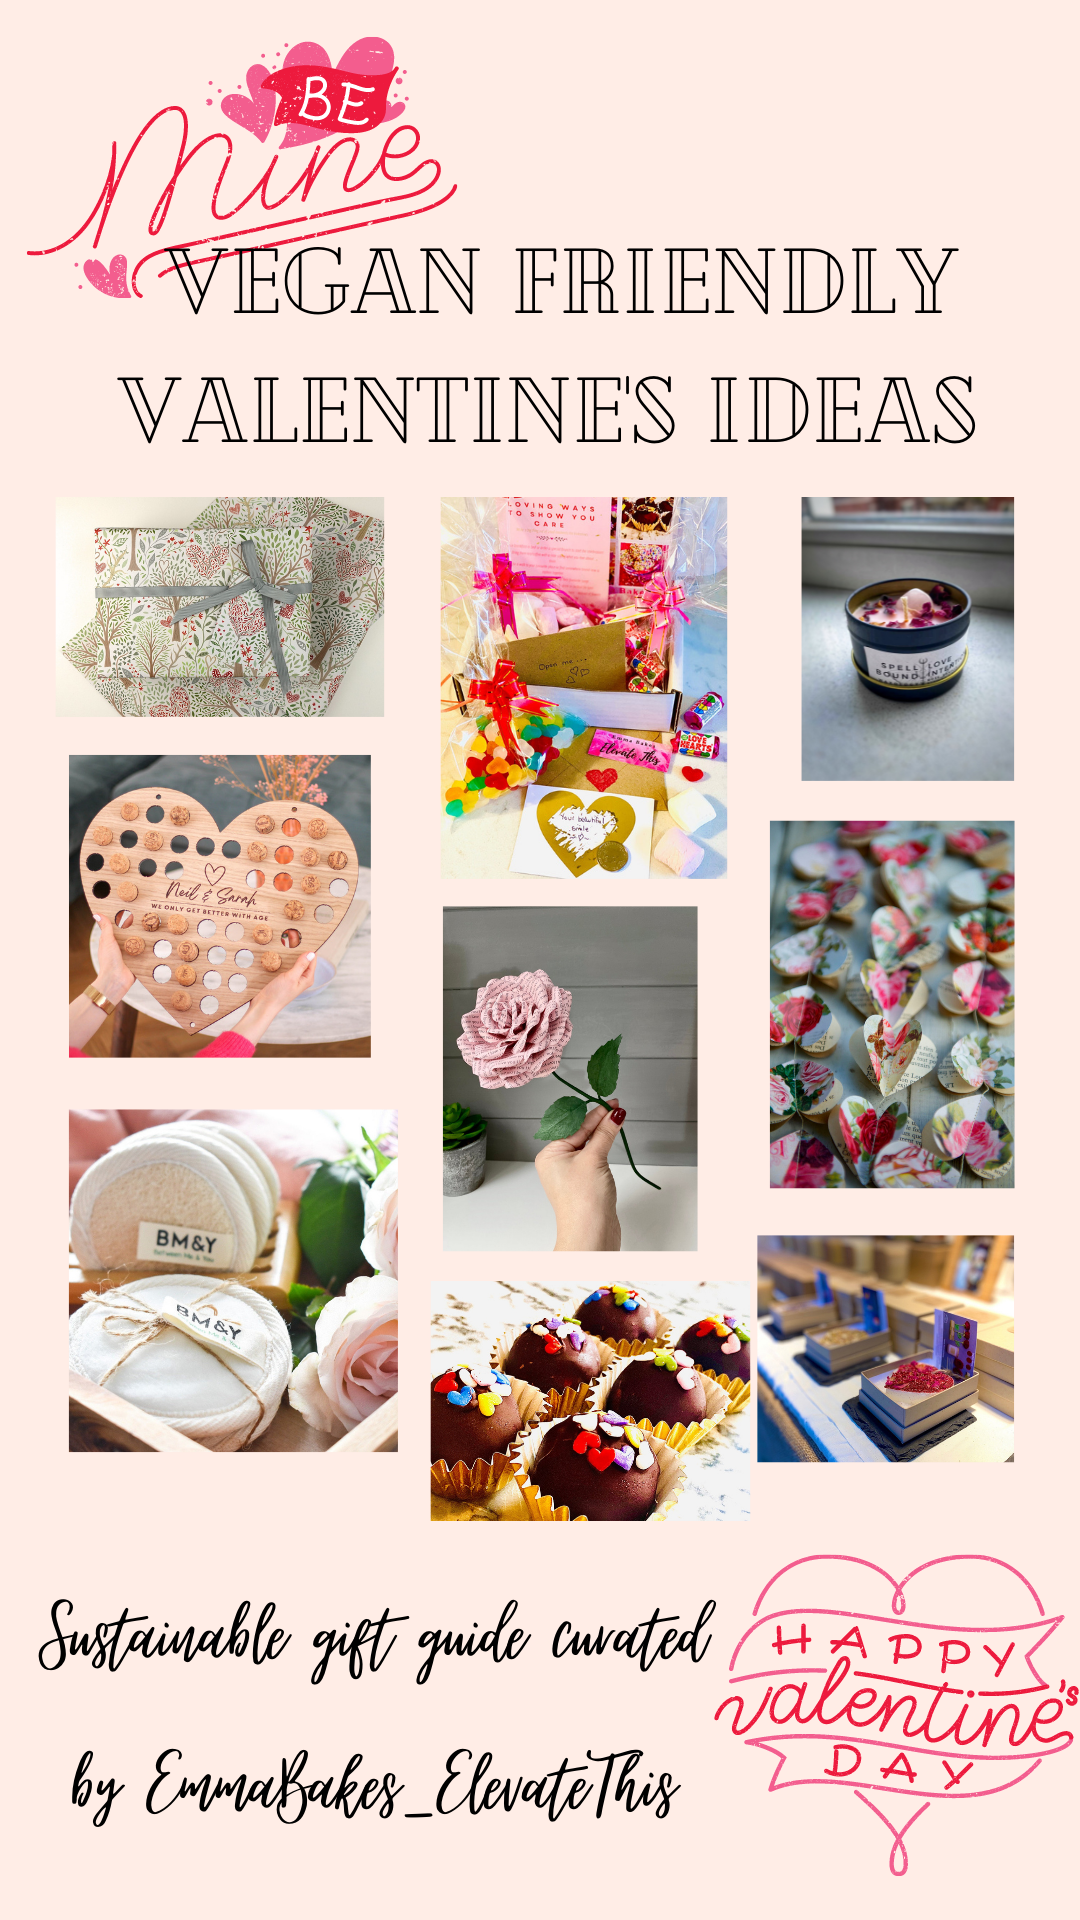 Vegan friendly Valentine’s – a sustainable gift guide